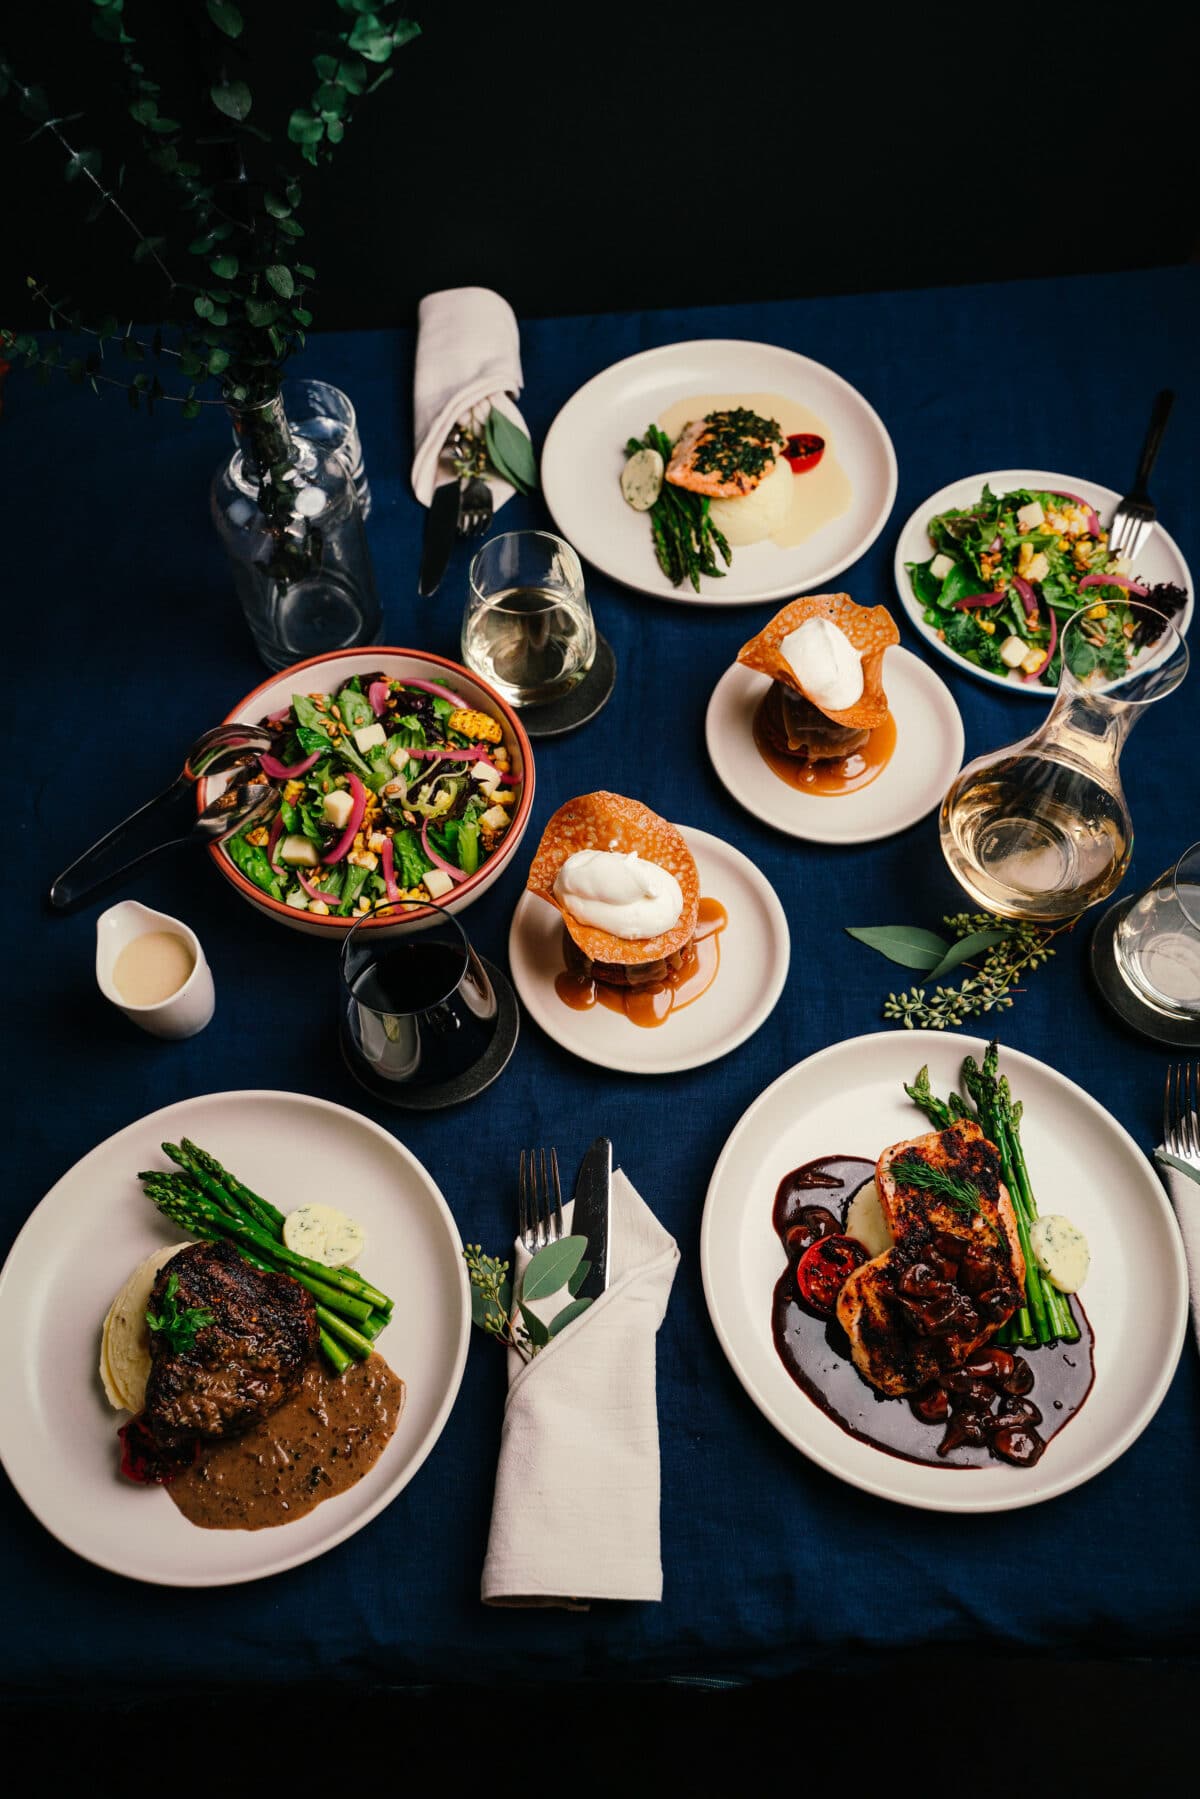 Saltlik's heat & serve 3-course meal for catering laid out on white plates.